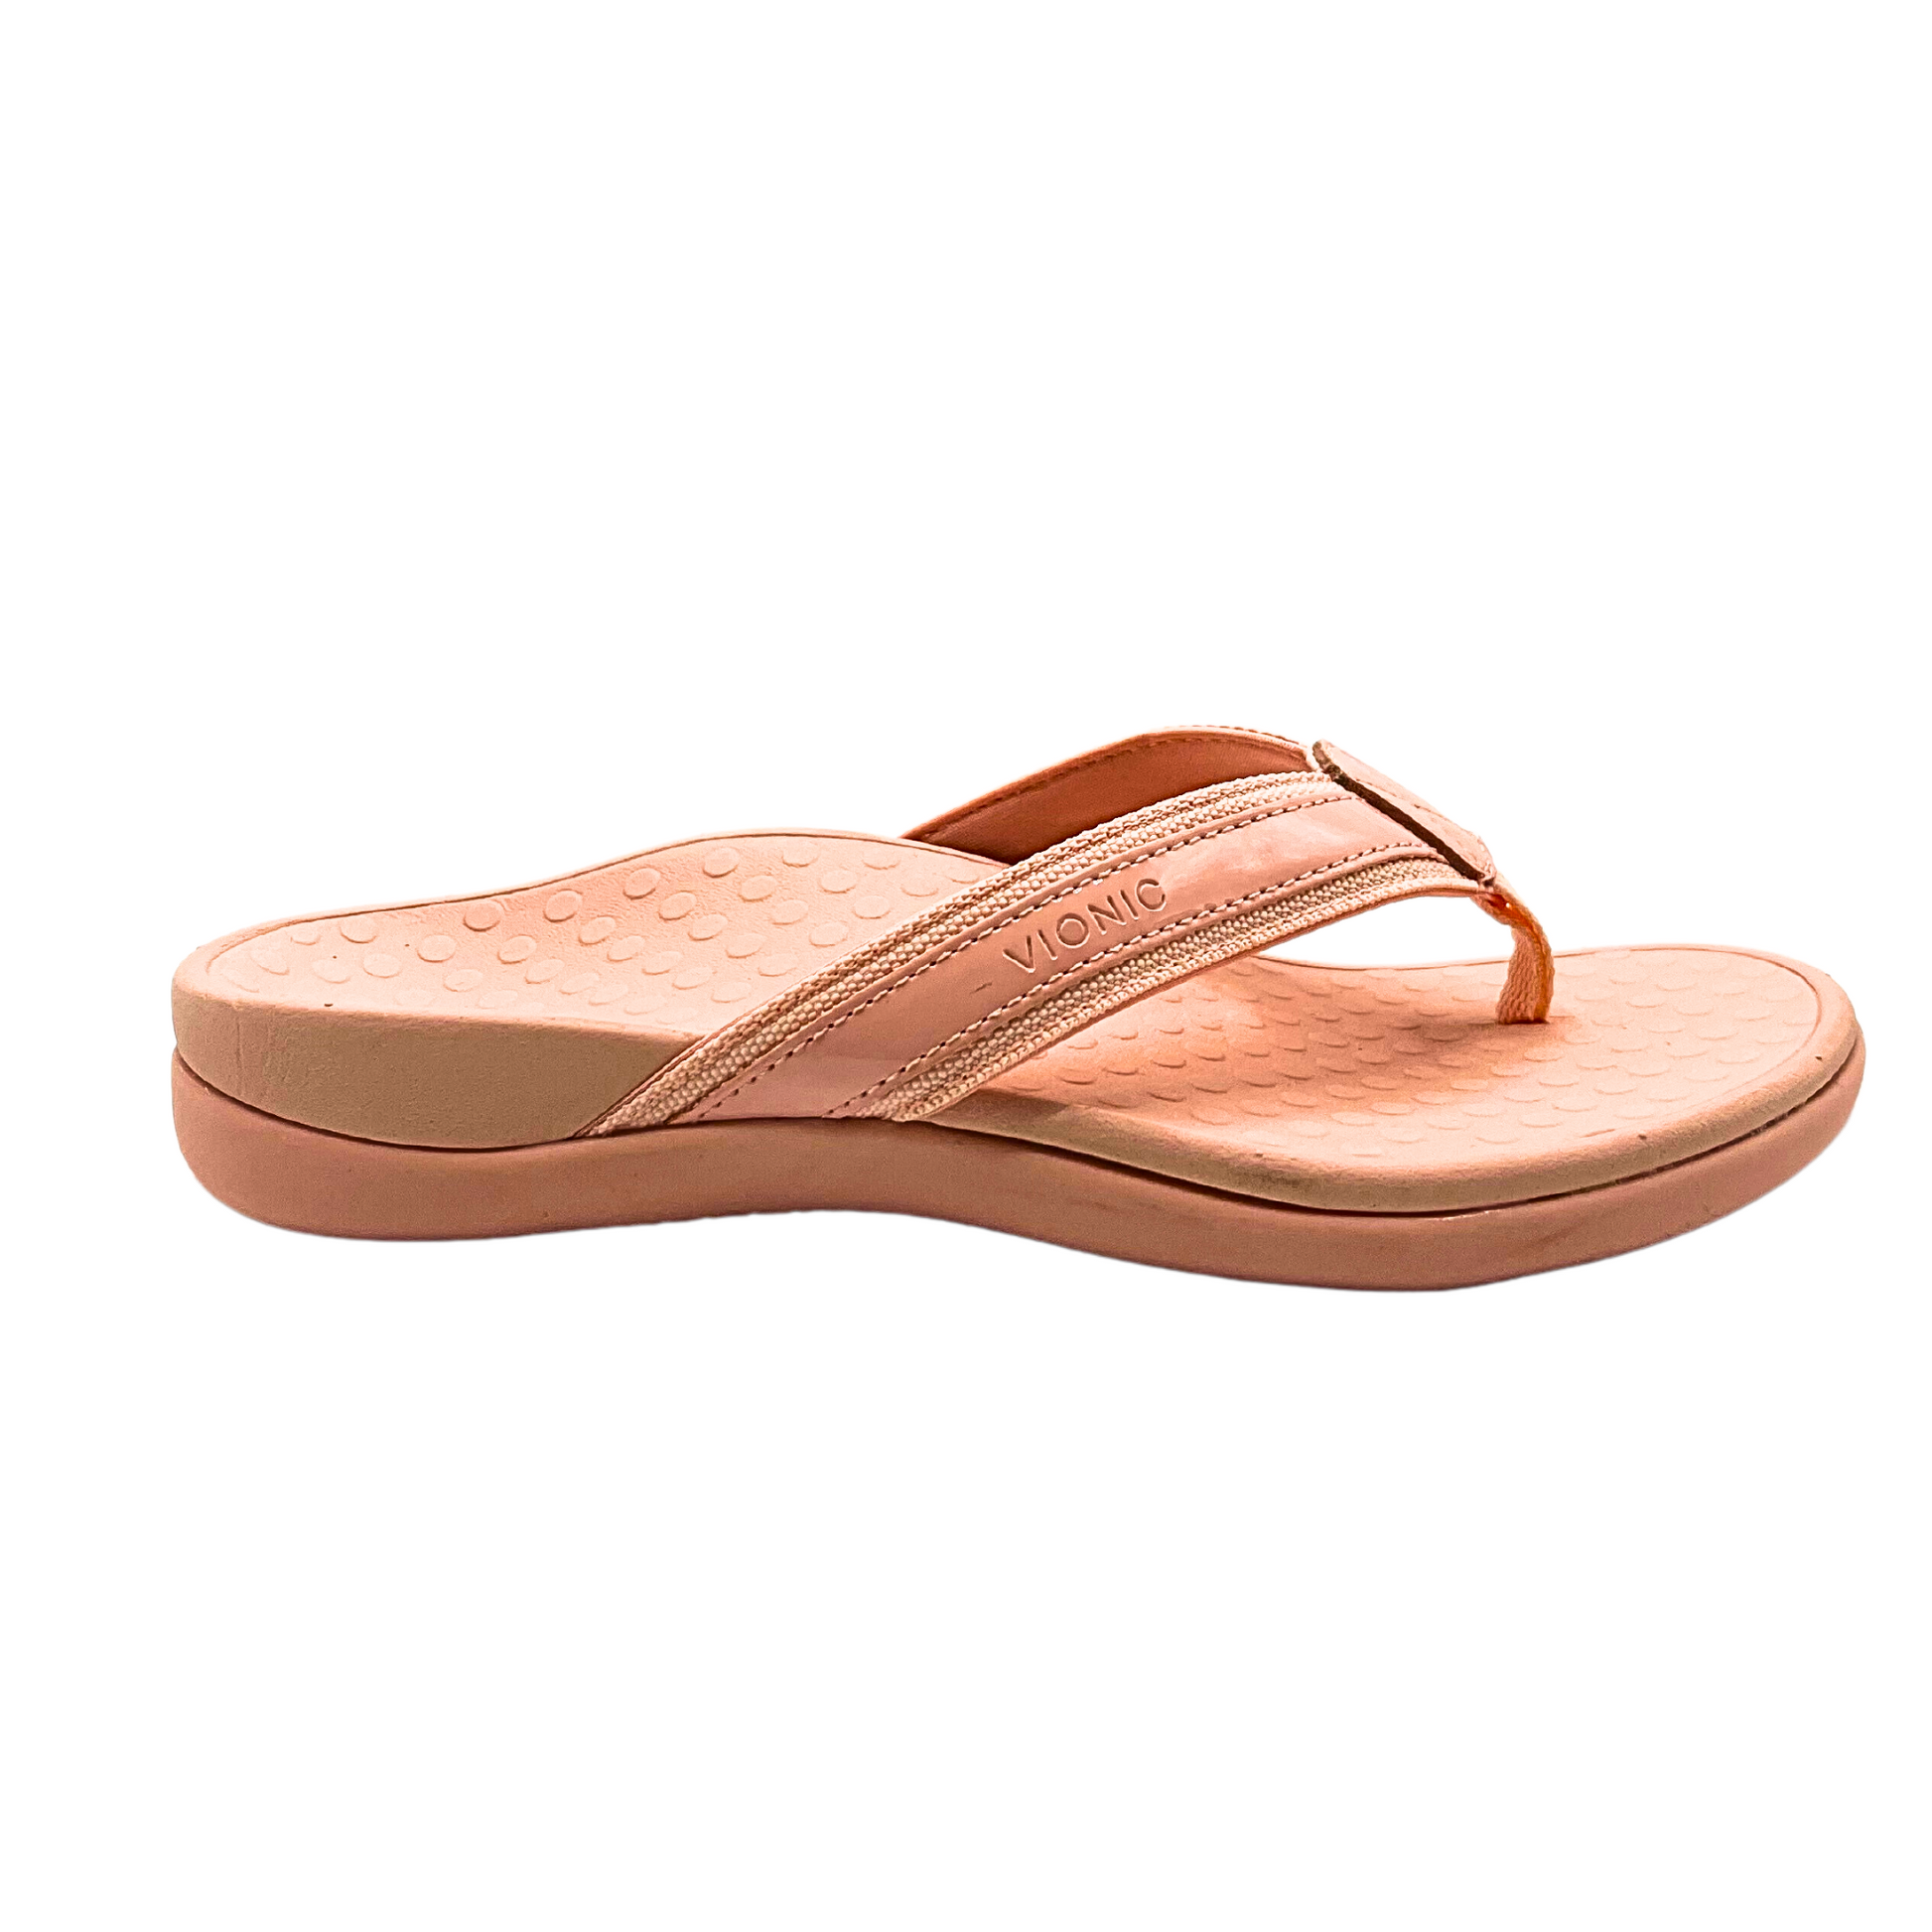 Outside view of a toe post flip flop by Vionic.  Nice, wide straps off the toe post.  Ergonomic, contoured footbed for great comfort and support